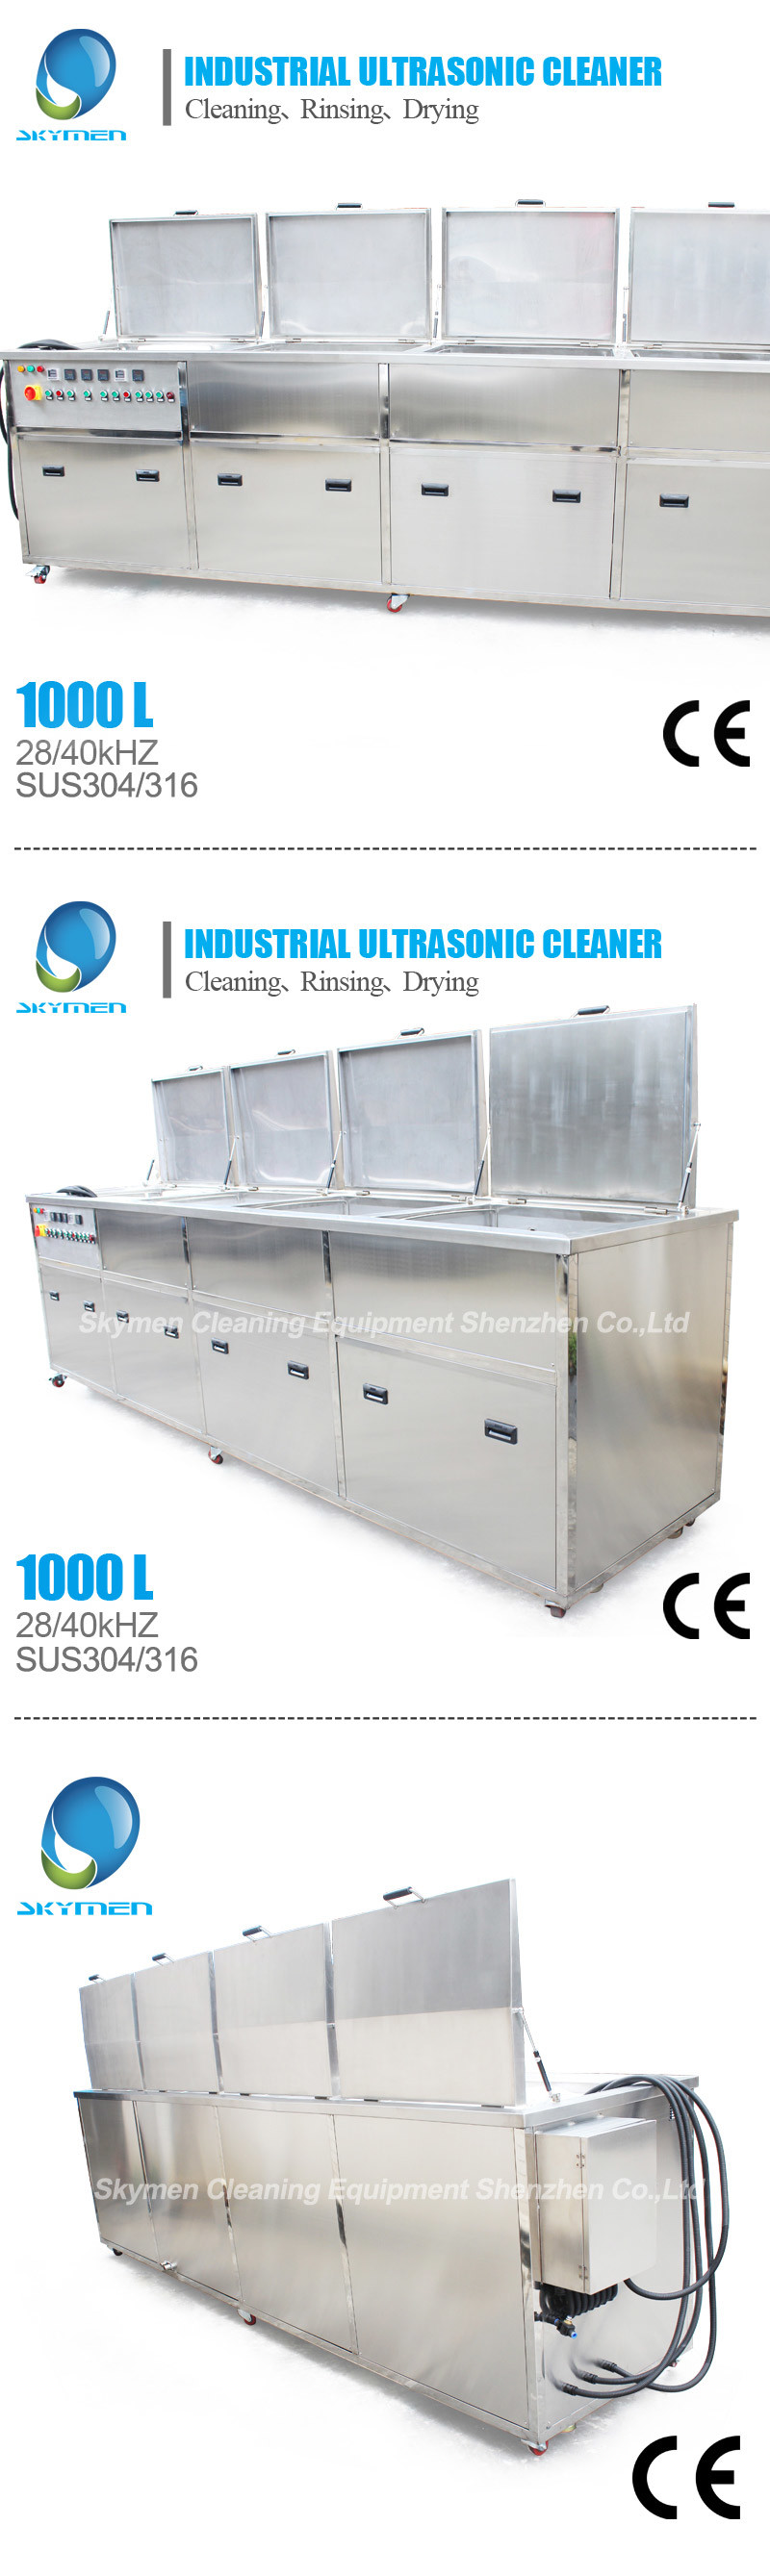 Skymen Three Tank Ultrasonic Cleaner for Coating Motor Parts